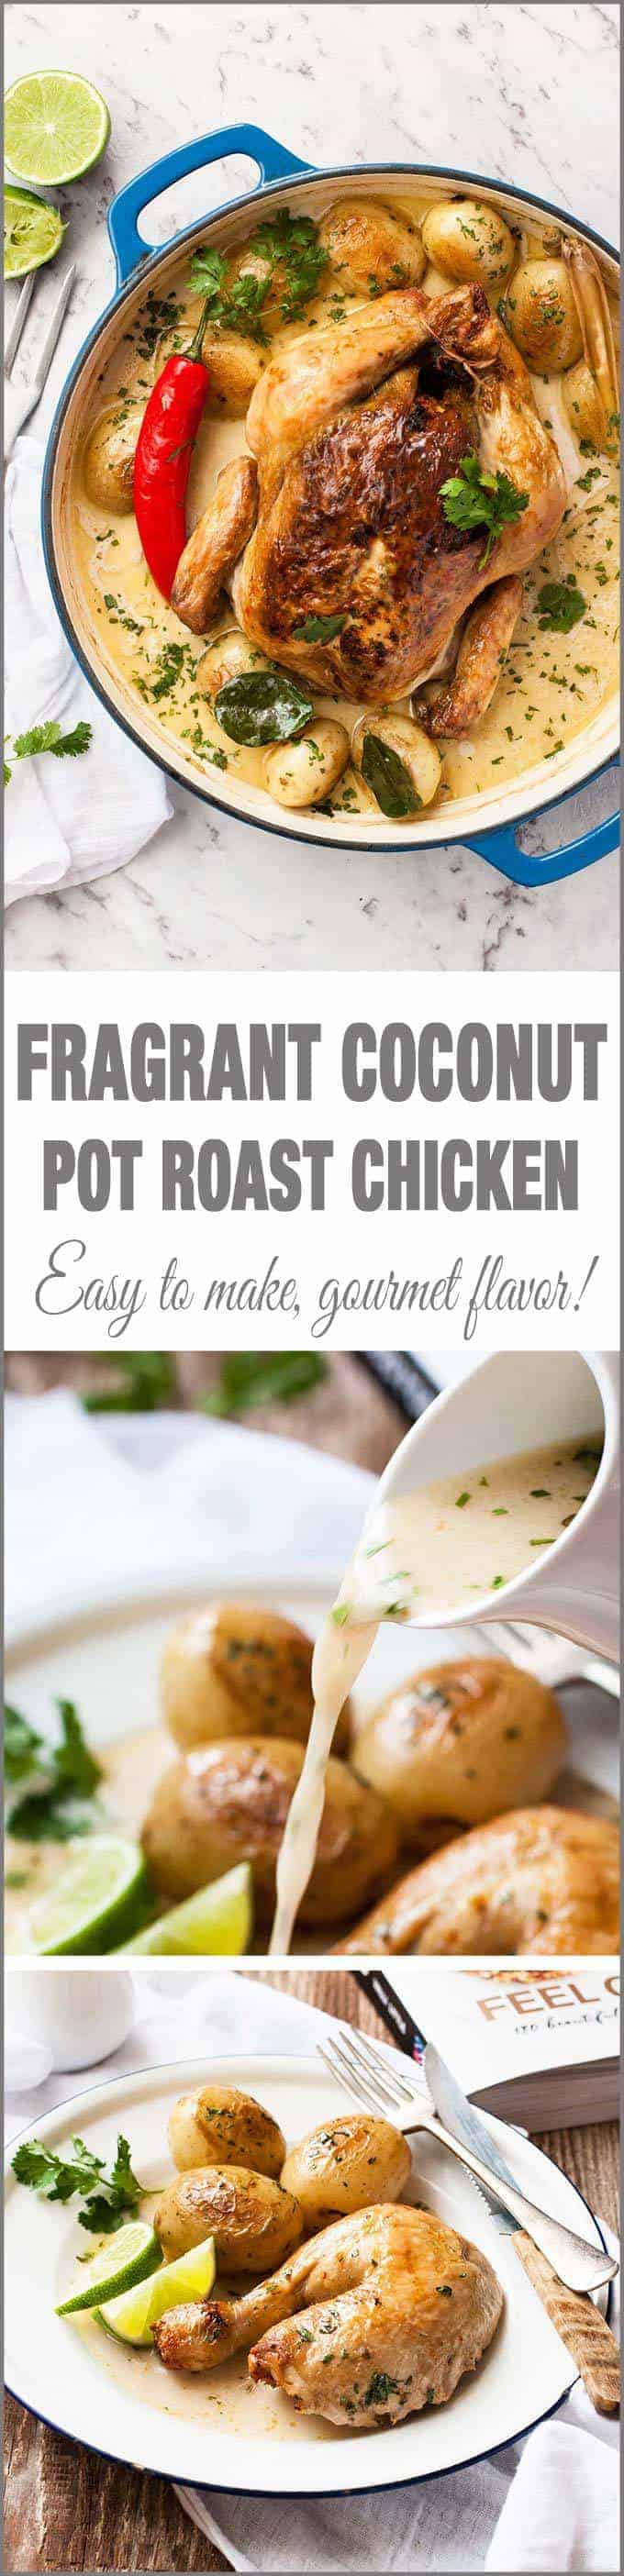 Fragrant Coconut Pot Roasted Chicken - Juicy Chicken roasted in a fragrant Asian-style coconut broth. Amazing flavor for so few ingredients! Substitutions provided.